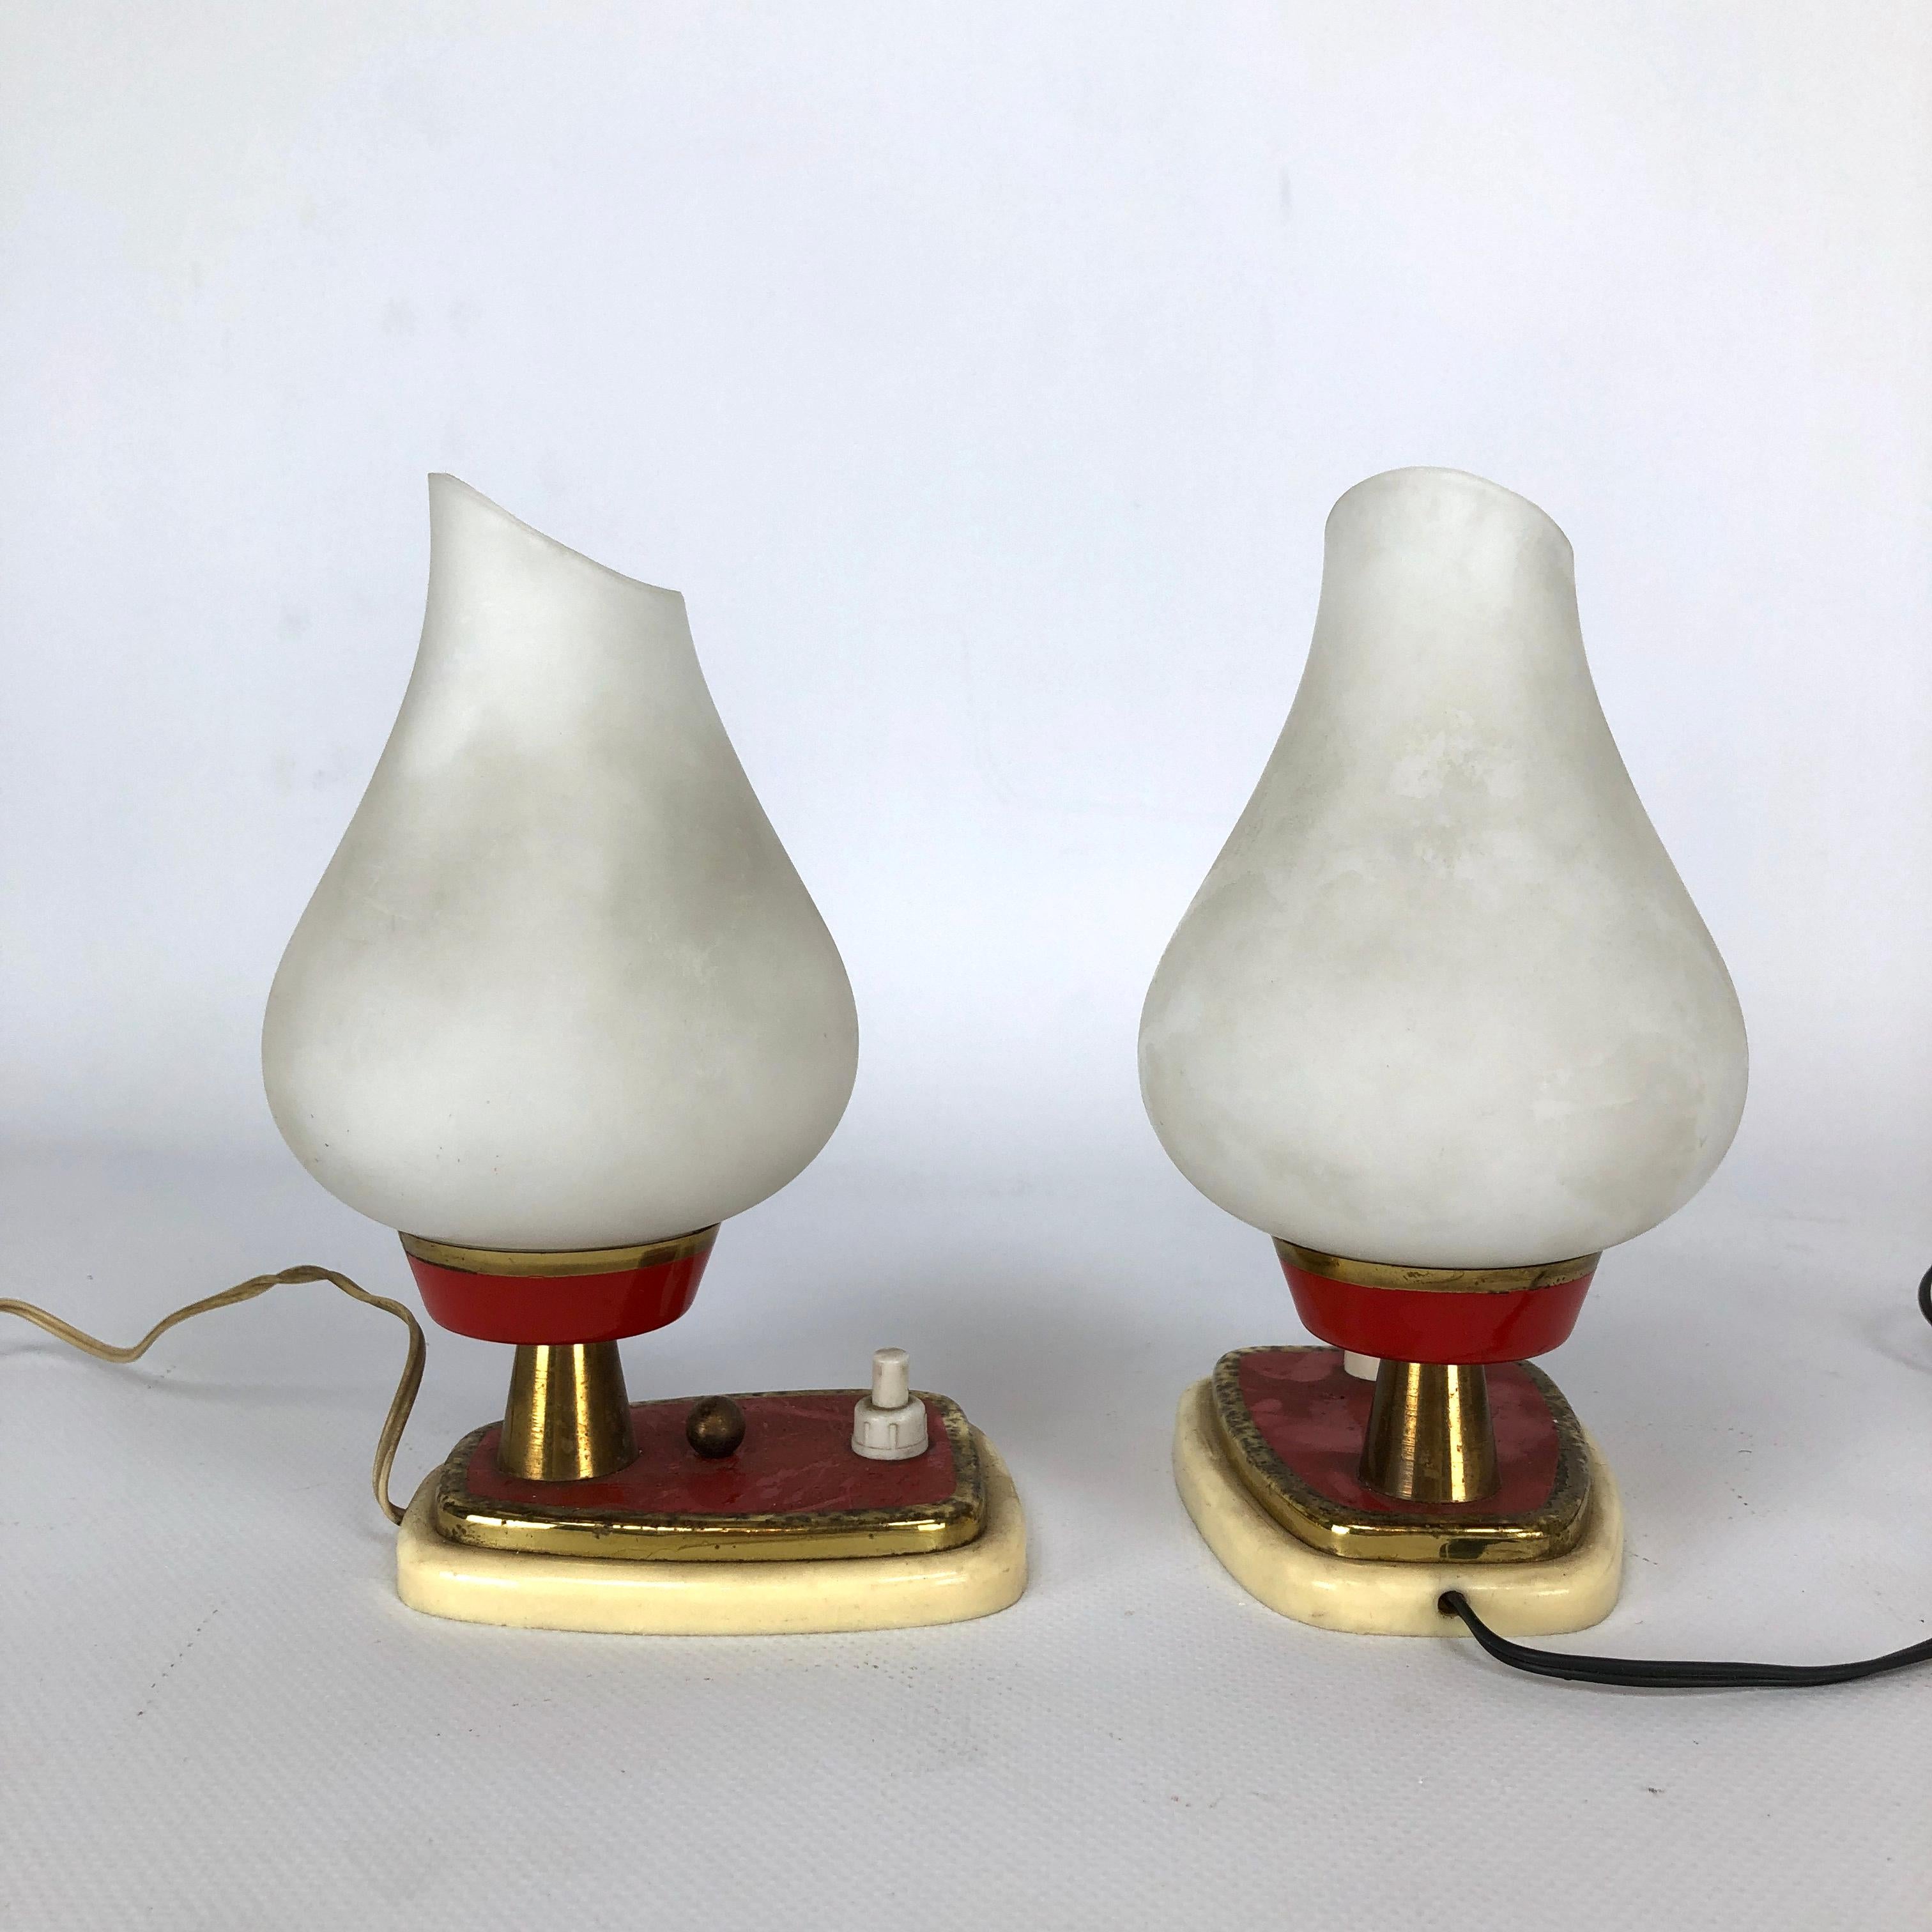 Pair of Midcentury Italian Table Lamps or Sconces In Good Condition For Sale In Catania, CT